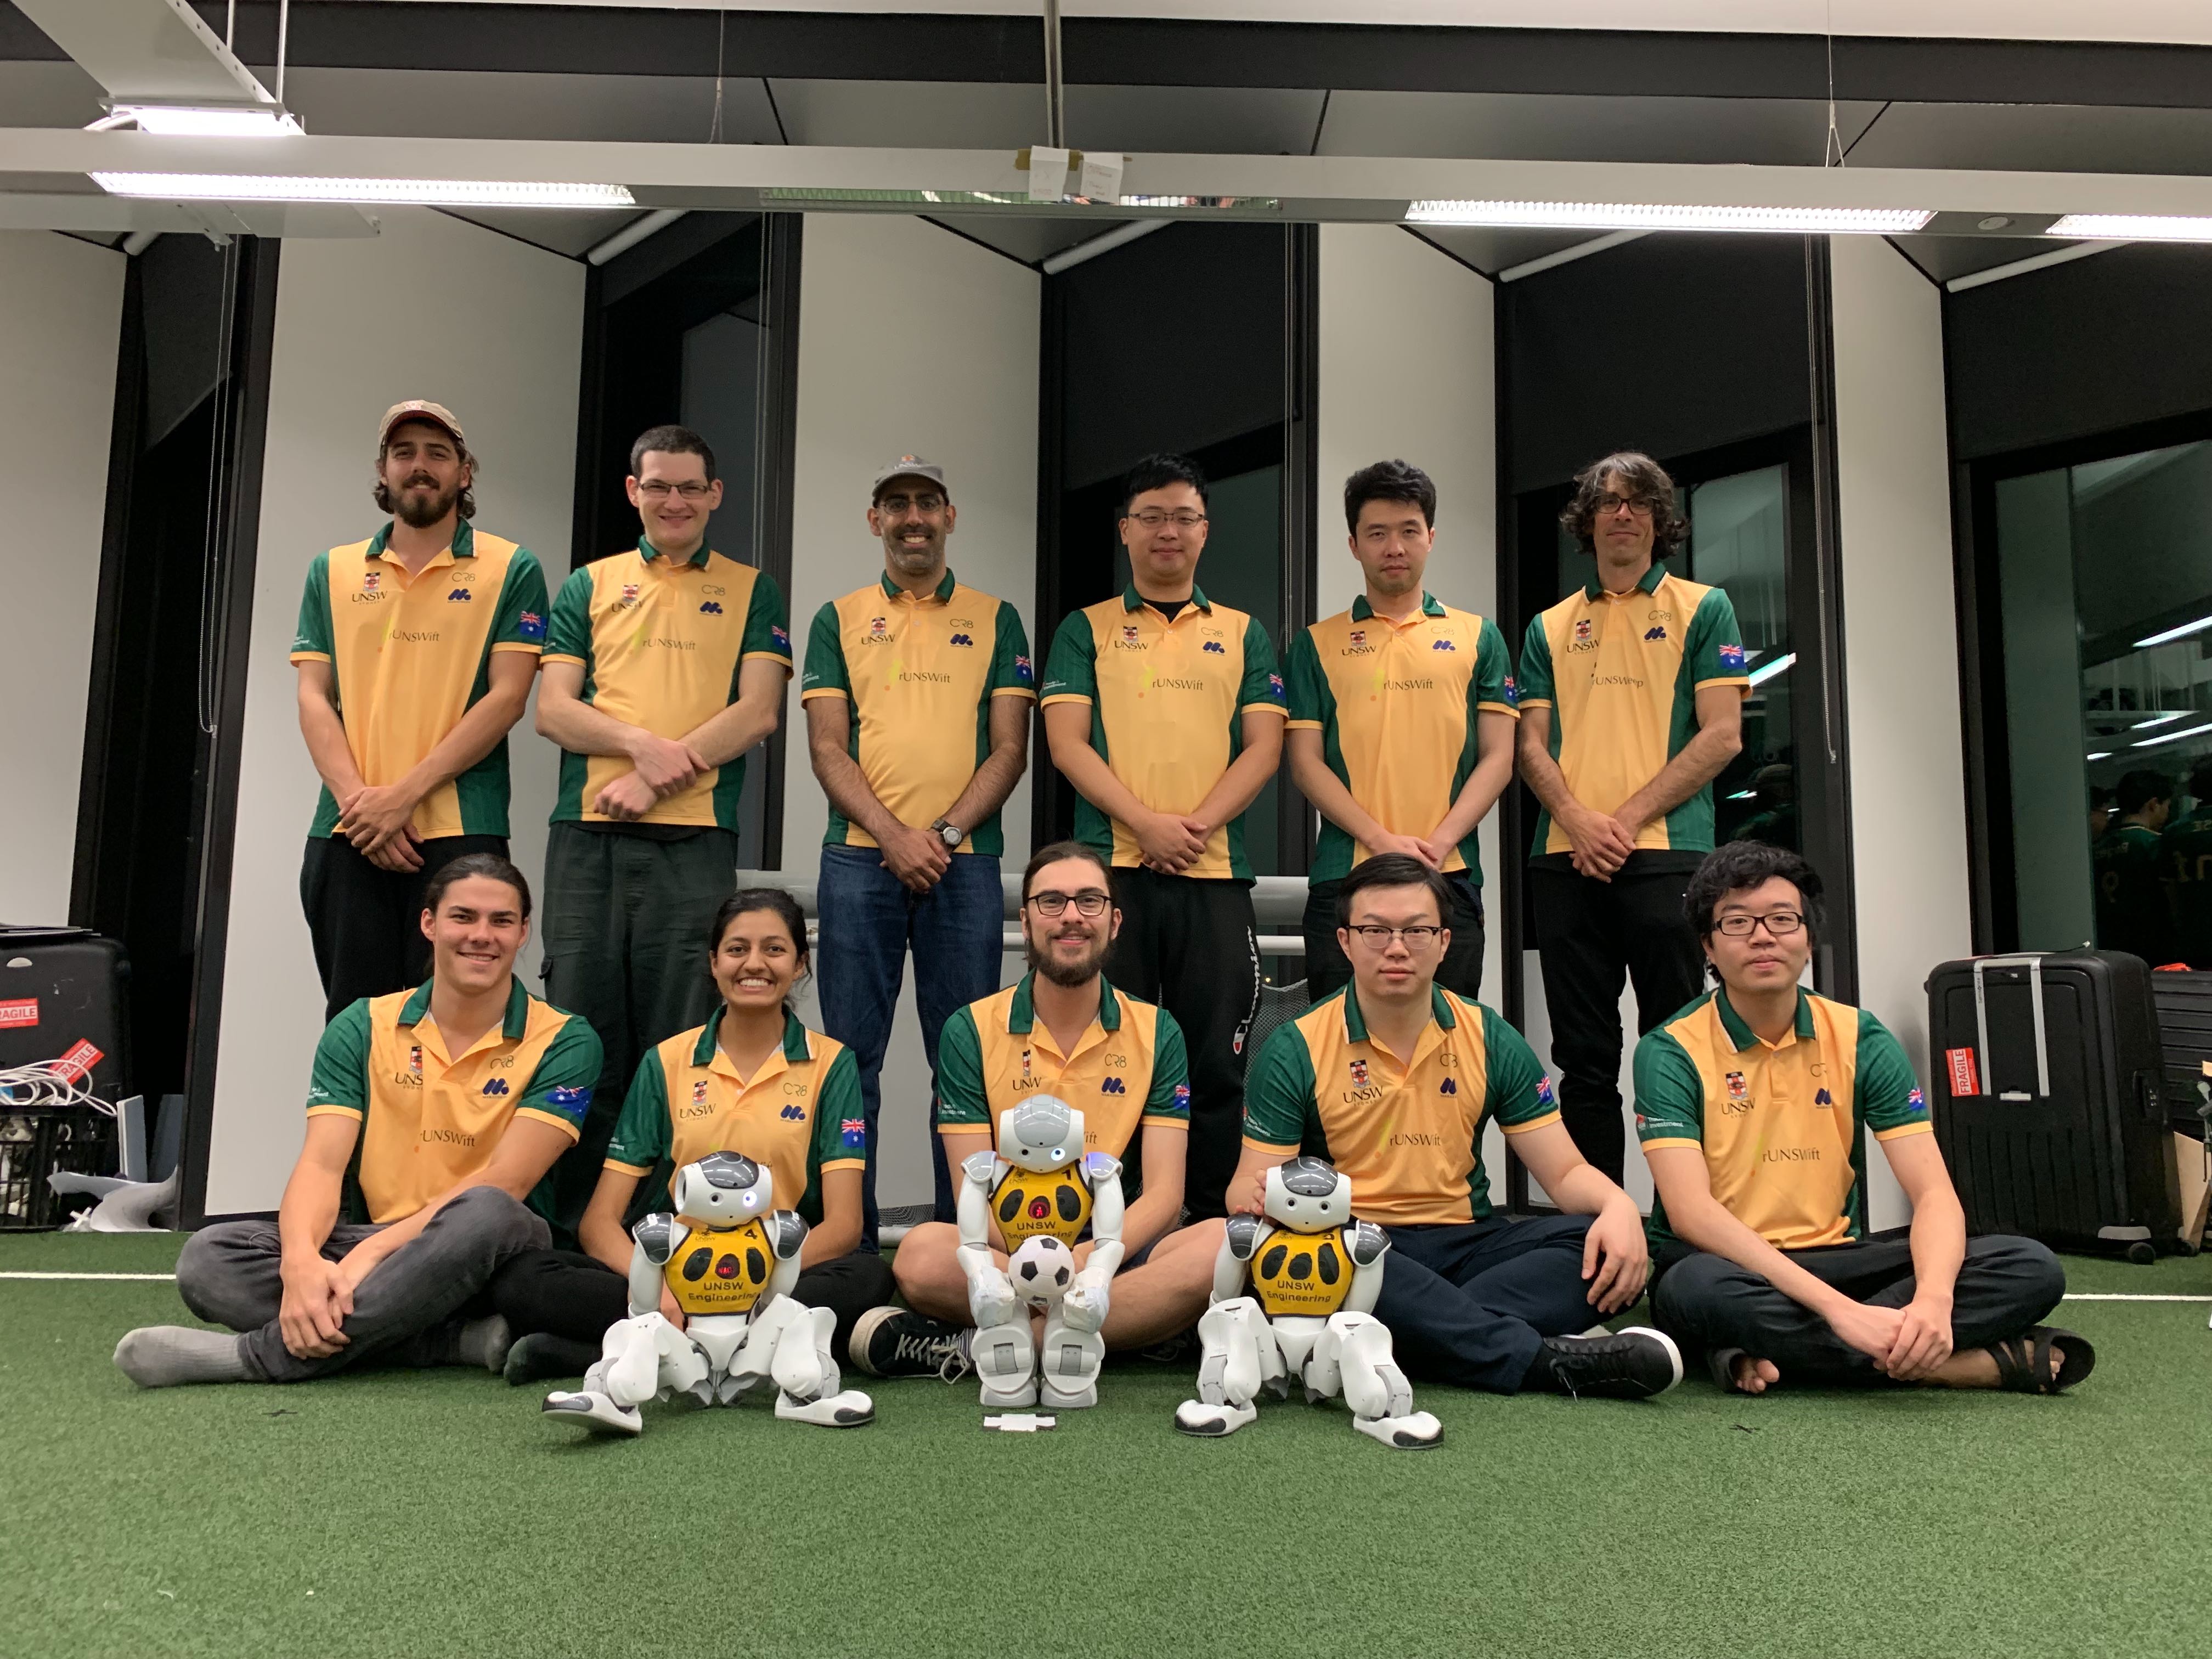 Members of the 2019 UNSW Sydney RoboCup team that will be competing in this year's world championships in Sydney.